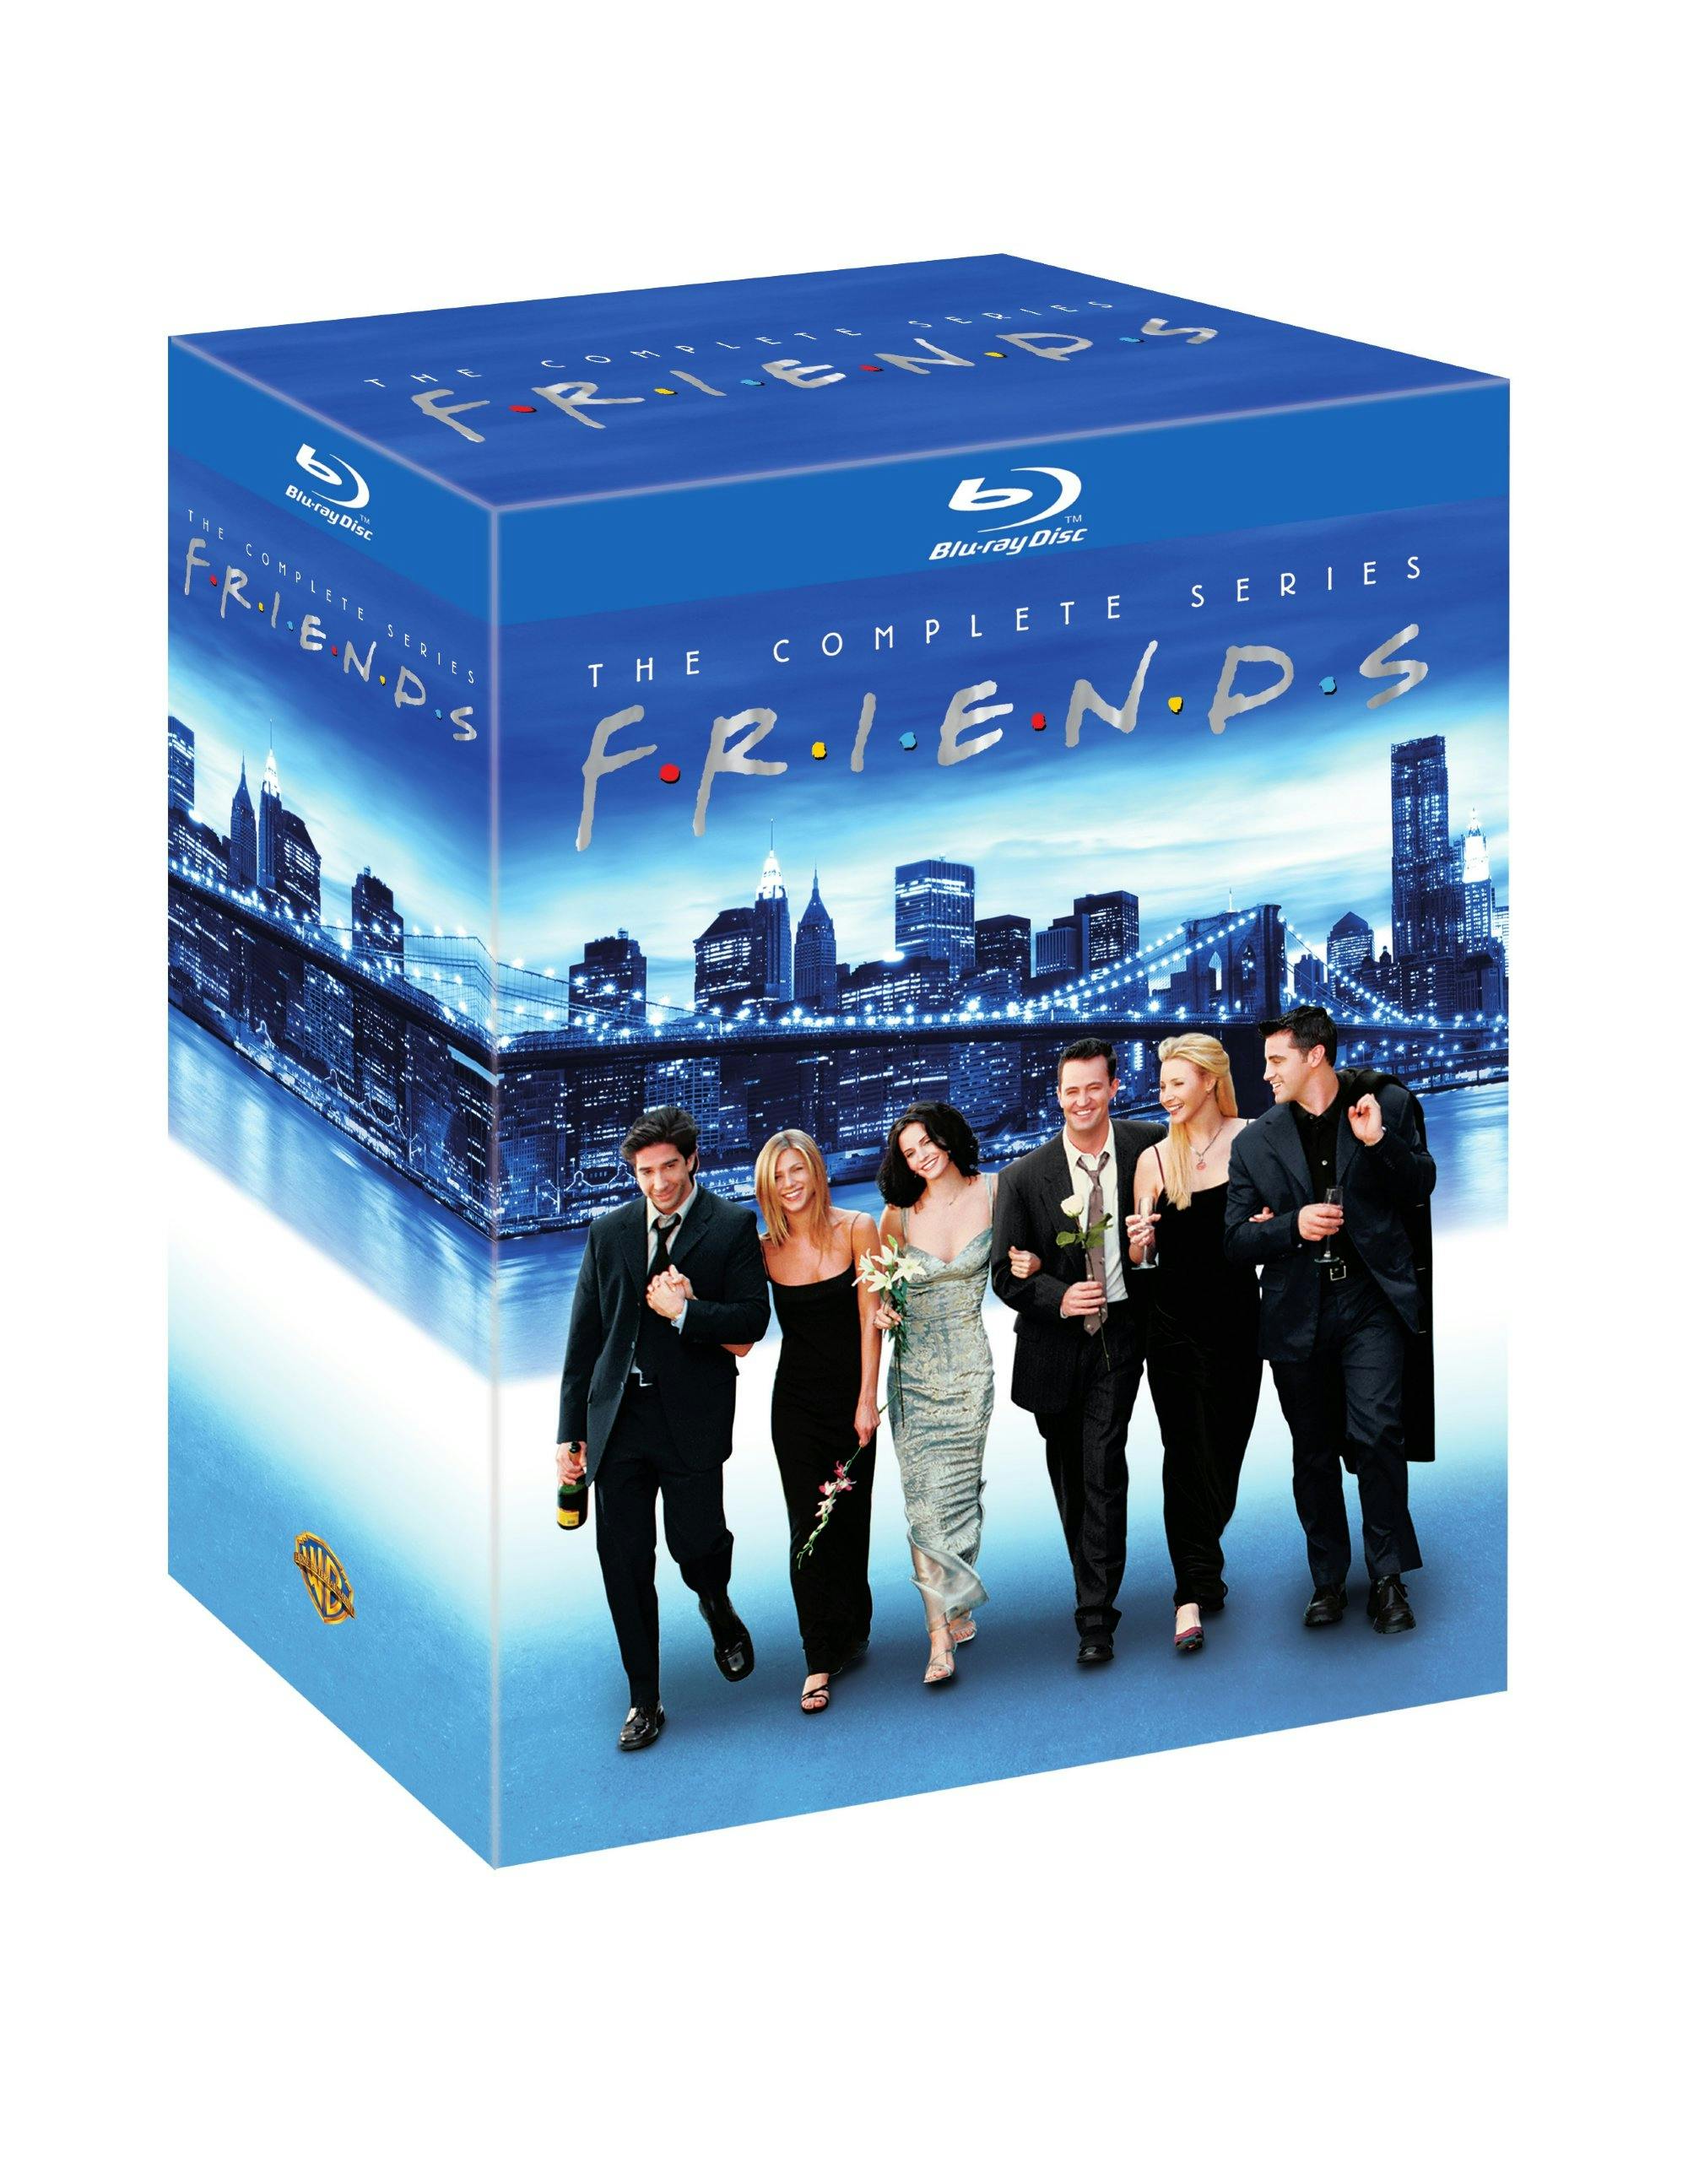 Friends: The Complete Series (Box Set) [Blu-ray]